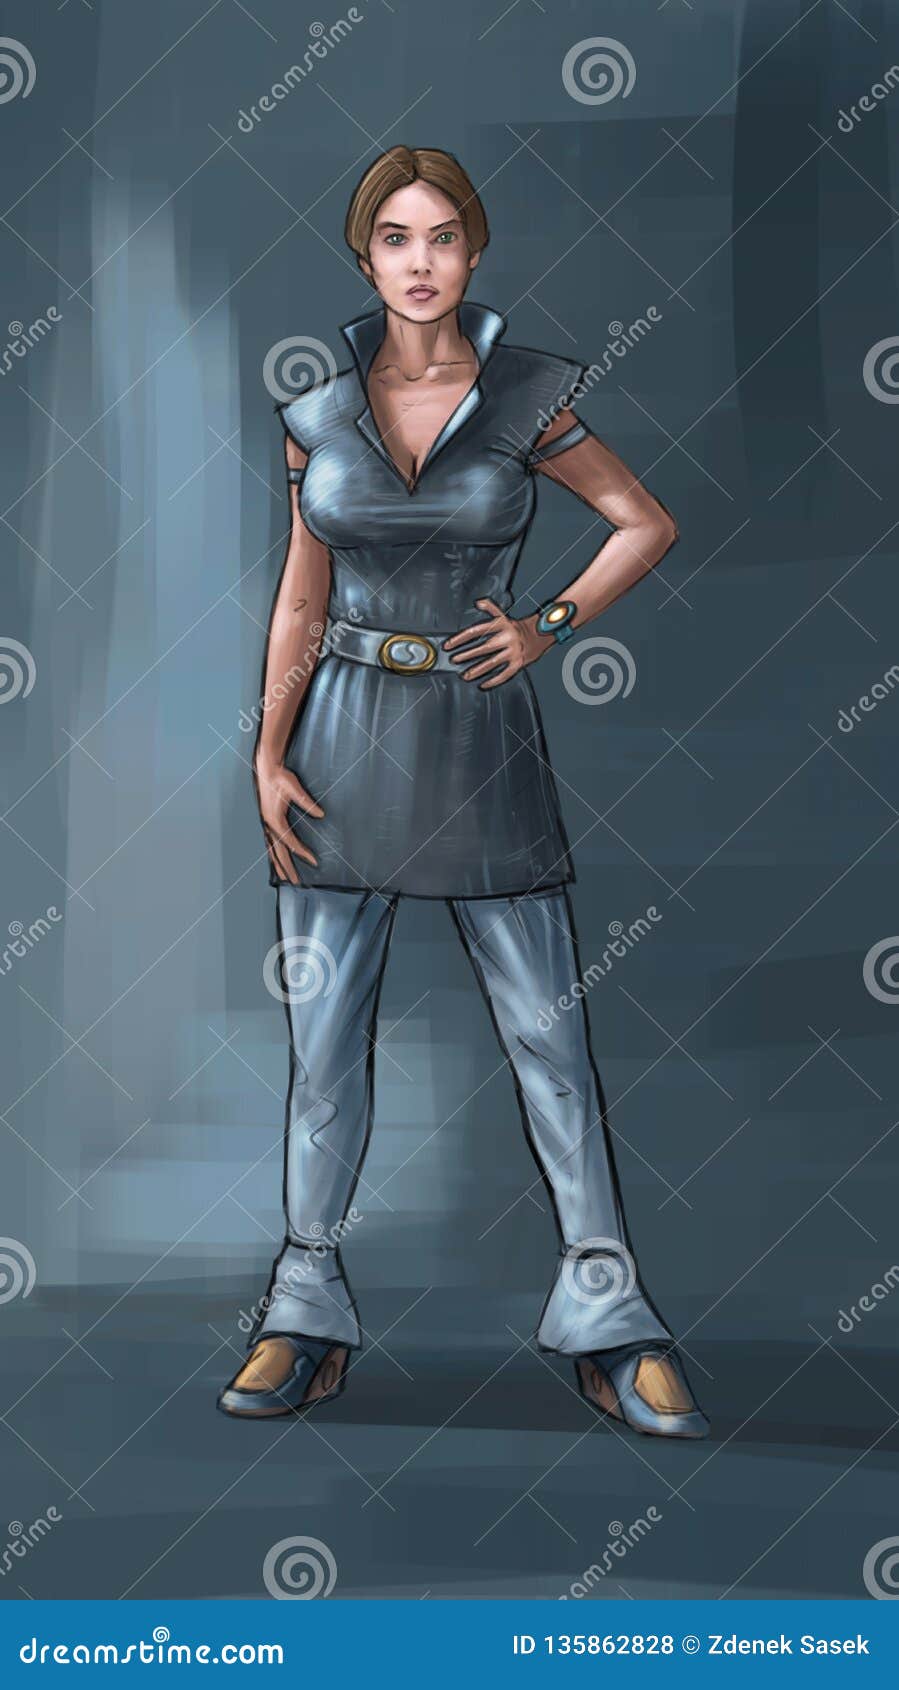 Concept Art Science Fiction Illustration Of Woman In